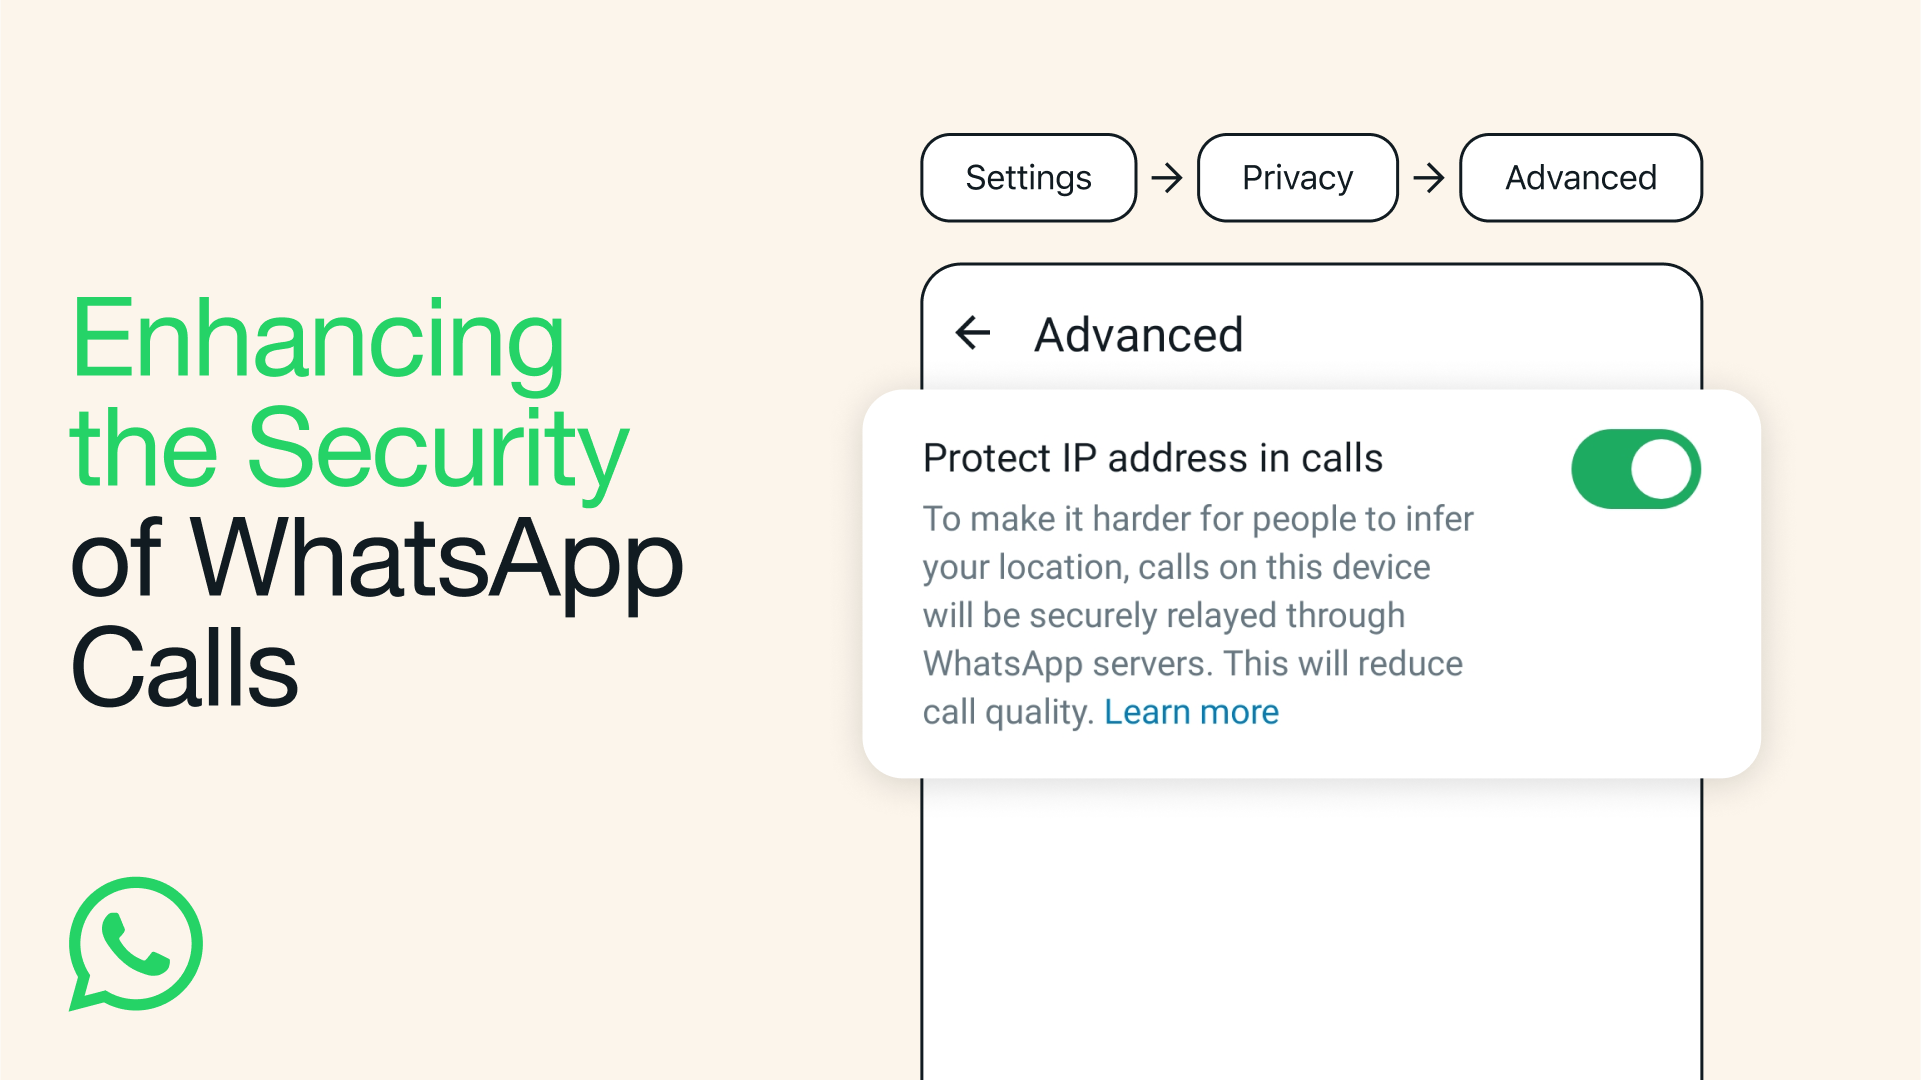 WhatsApp users can now hide their IP address during calls